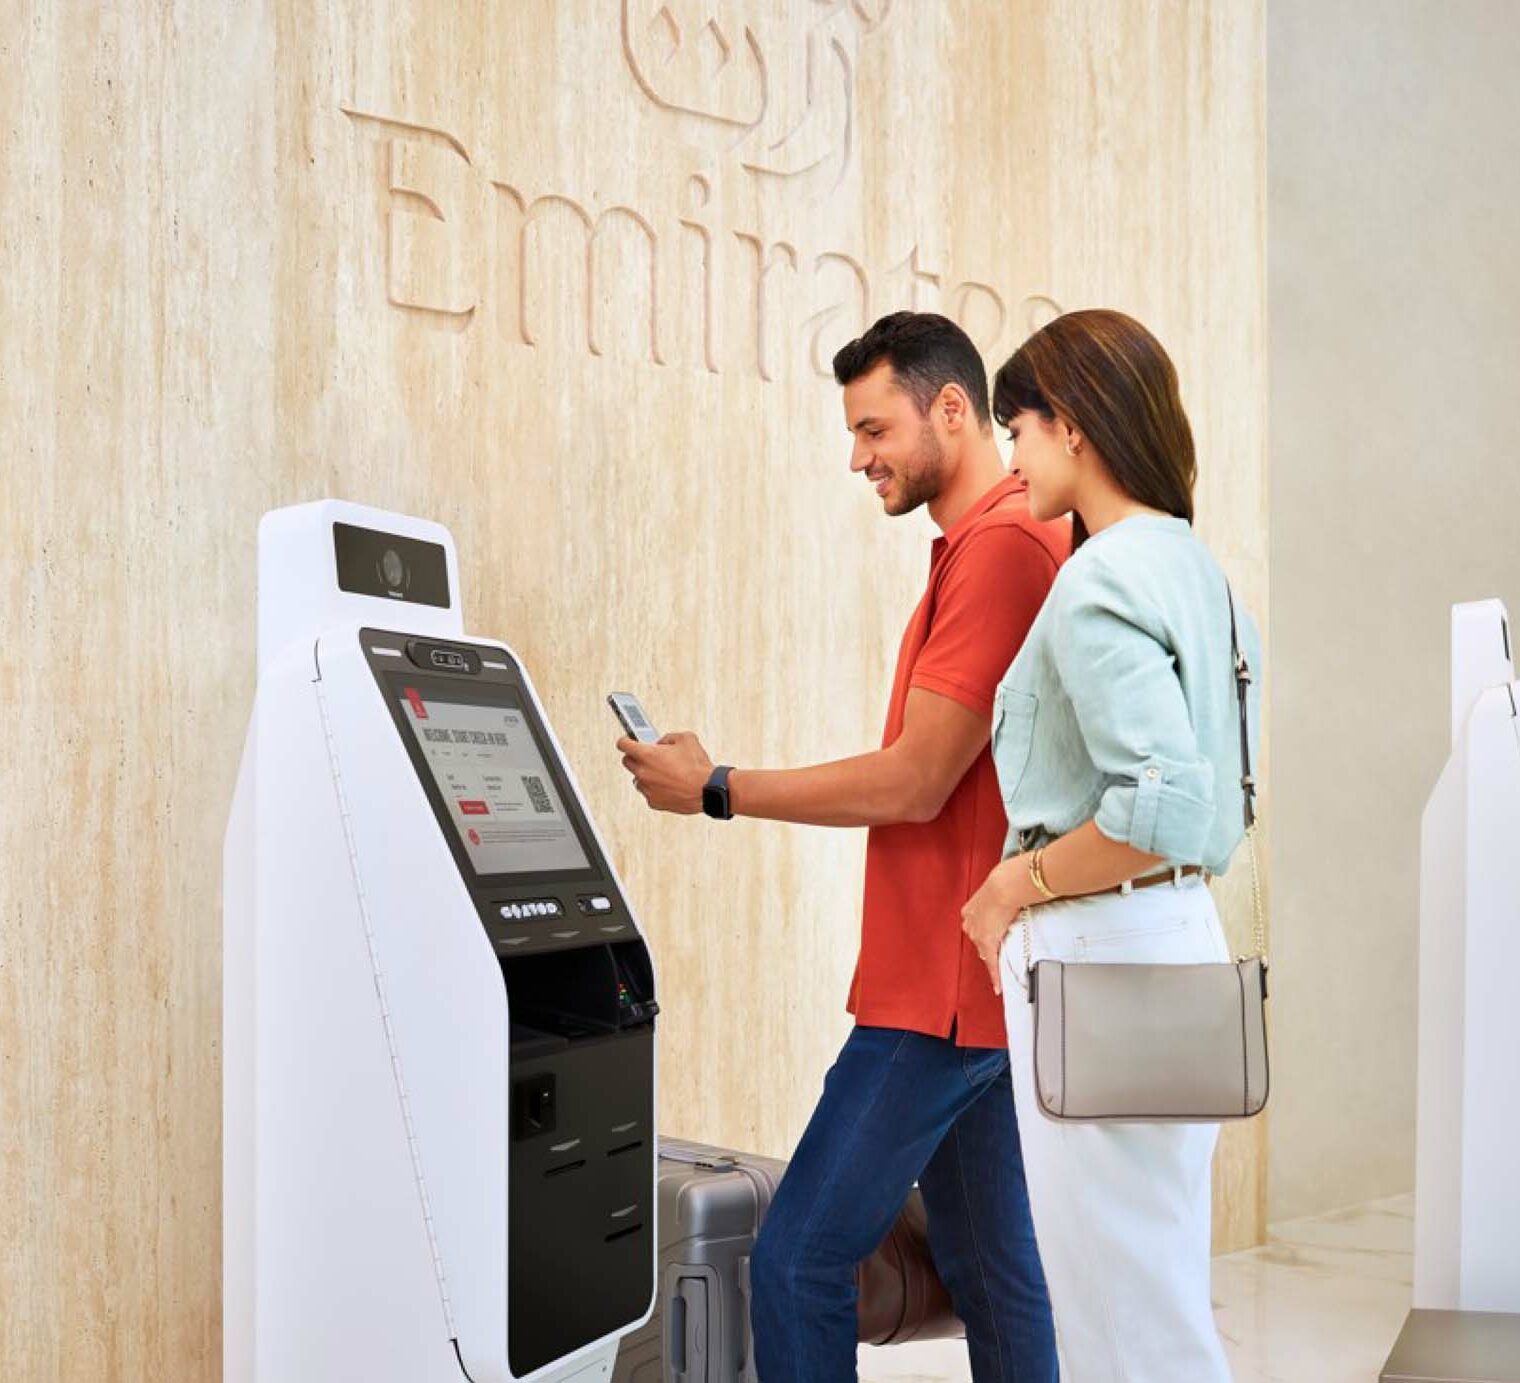 Emirates at ICD Brookfield Place - ticket machines